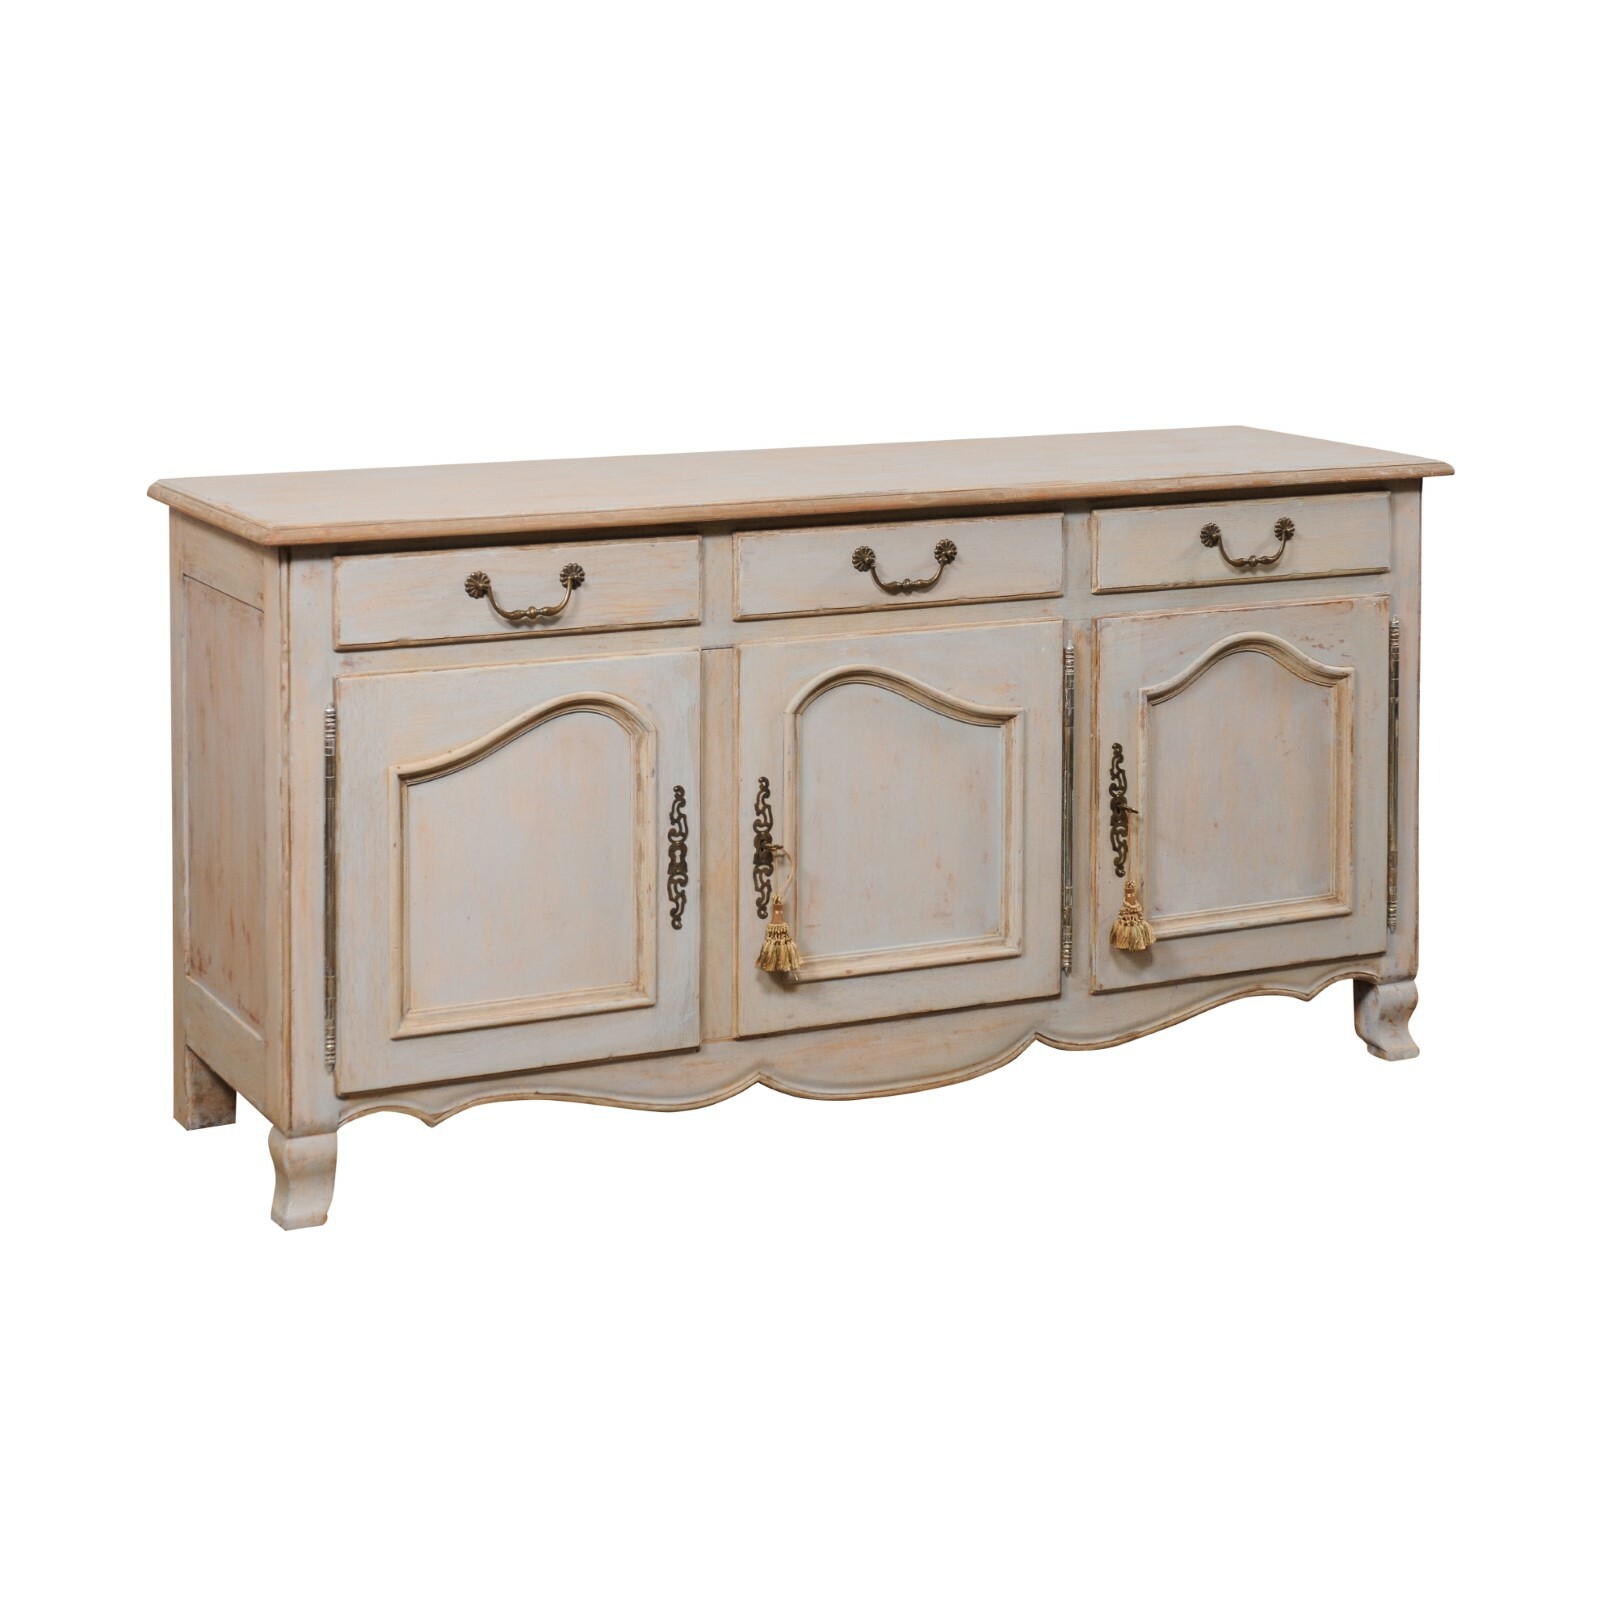 Italian Carved & Painted 6' Long Sideboard